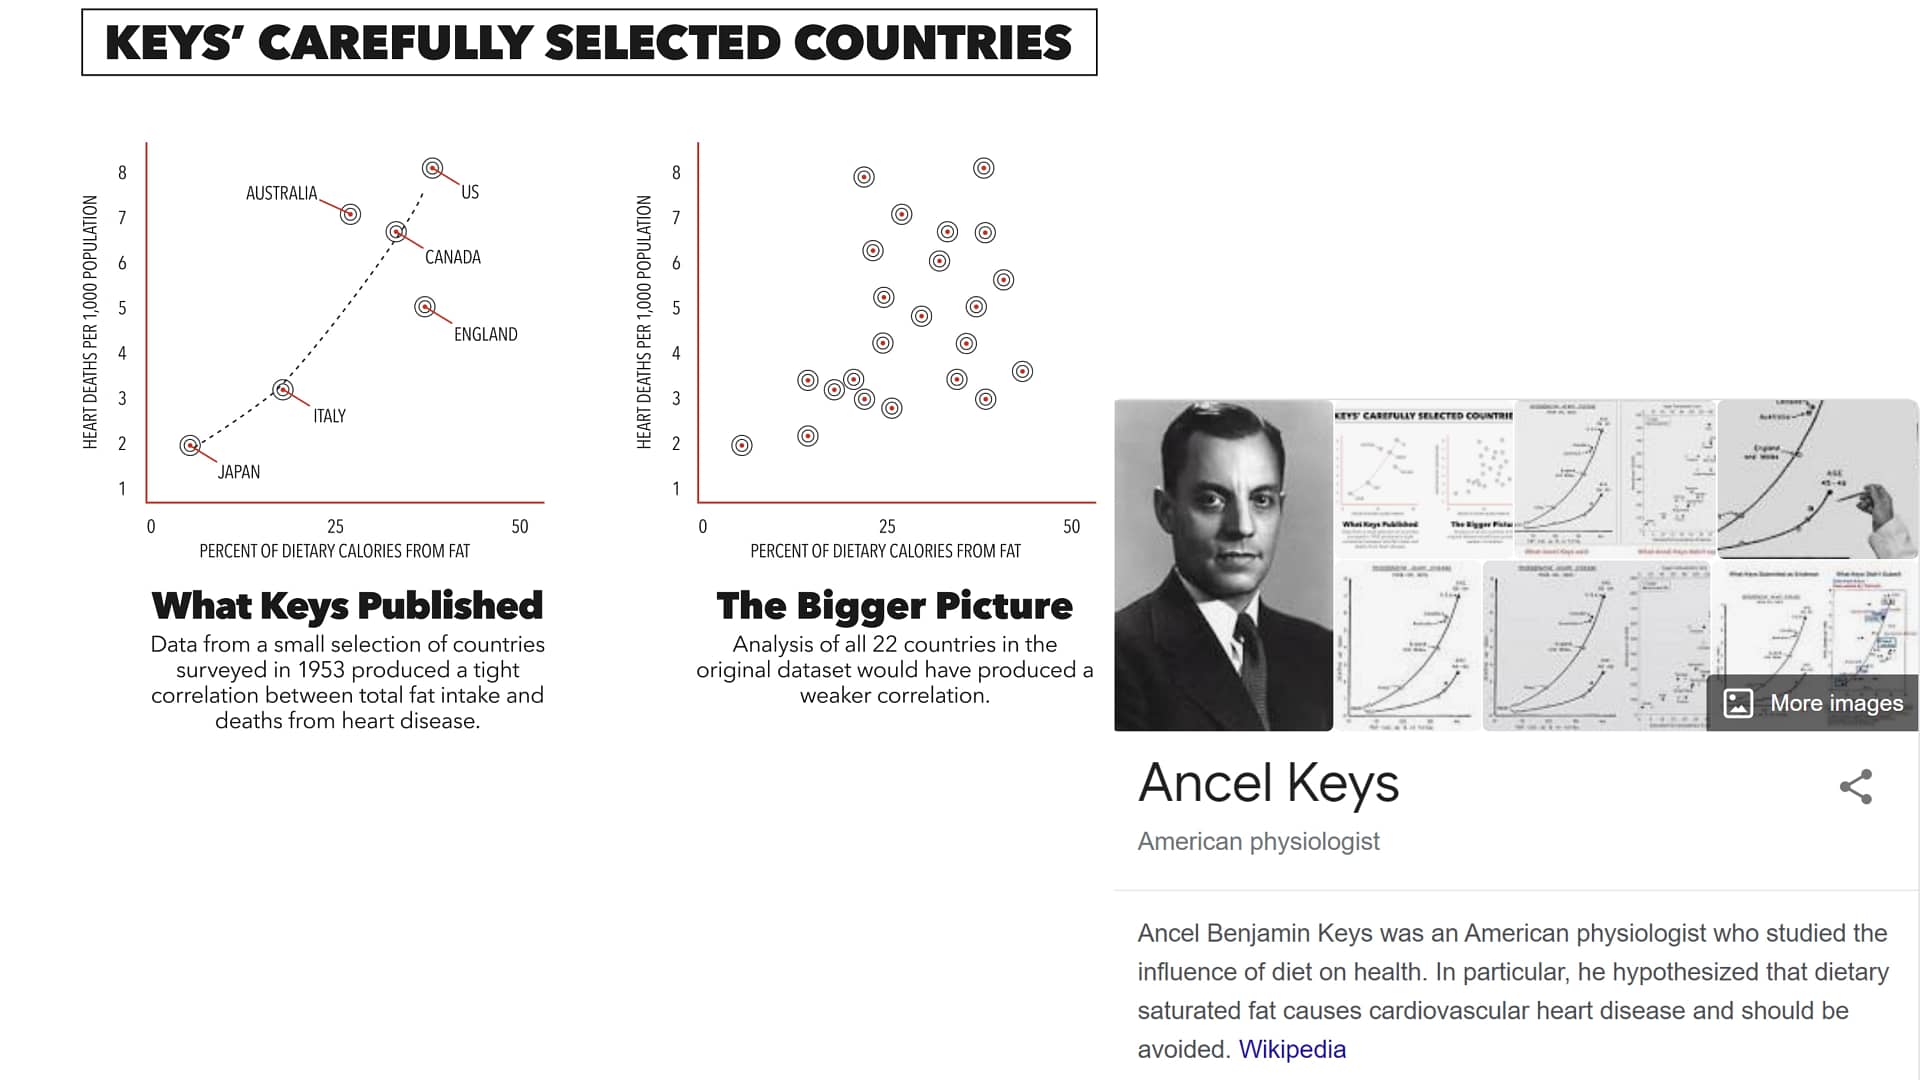 Ancel Keys and his falsified study proving that saturated fats are harmful. The lipid heart disease hypothesis is a lie.